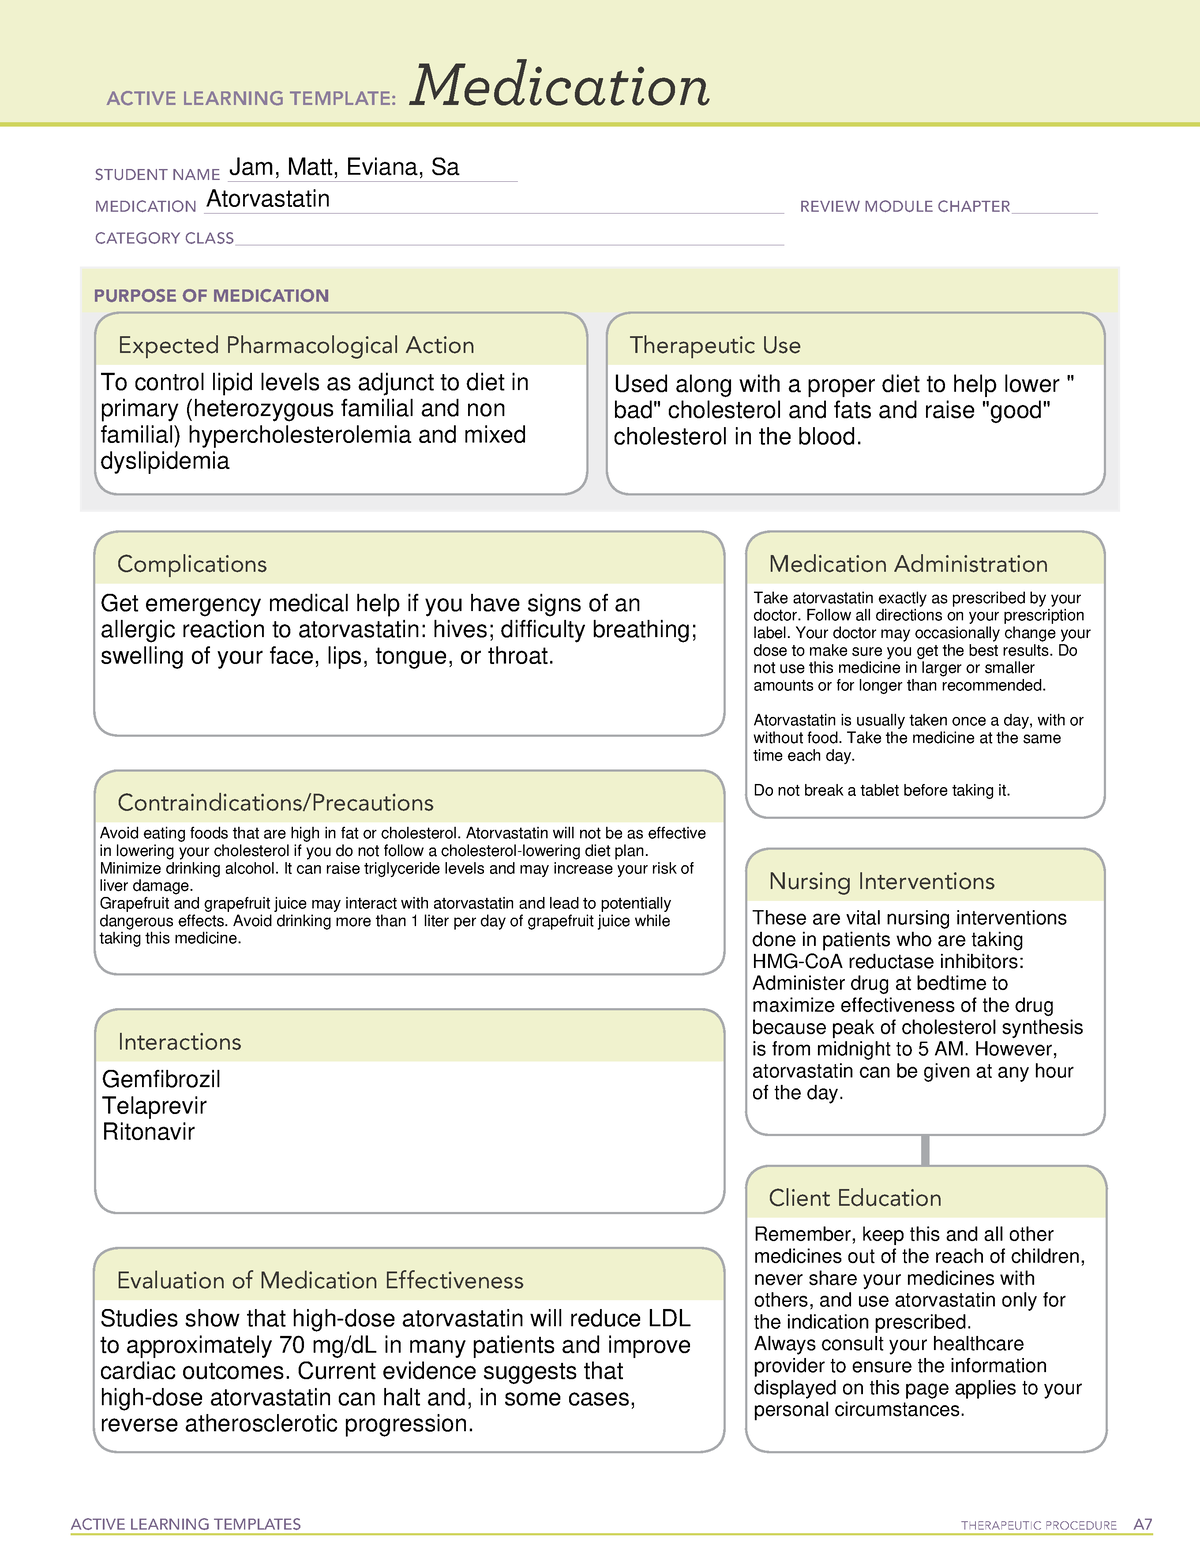 Atorvastatin Active Learning Template medication ACTIVE LEARNING